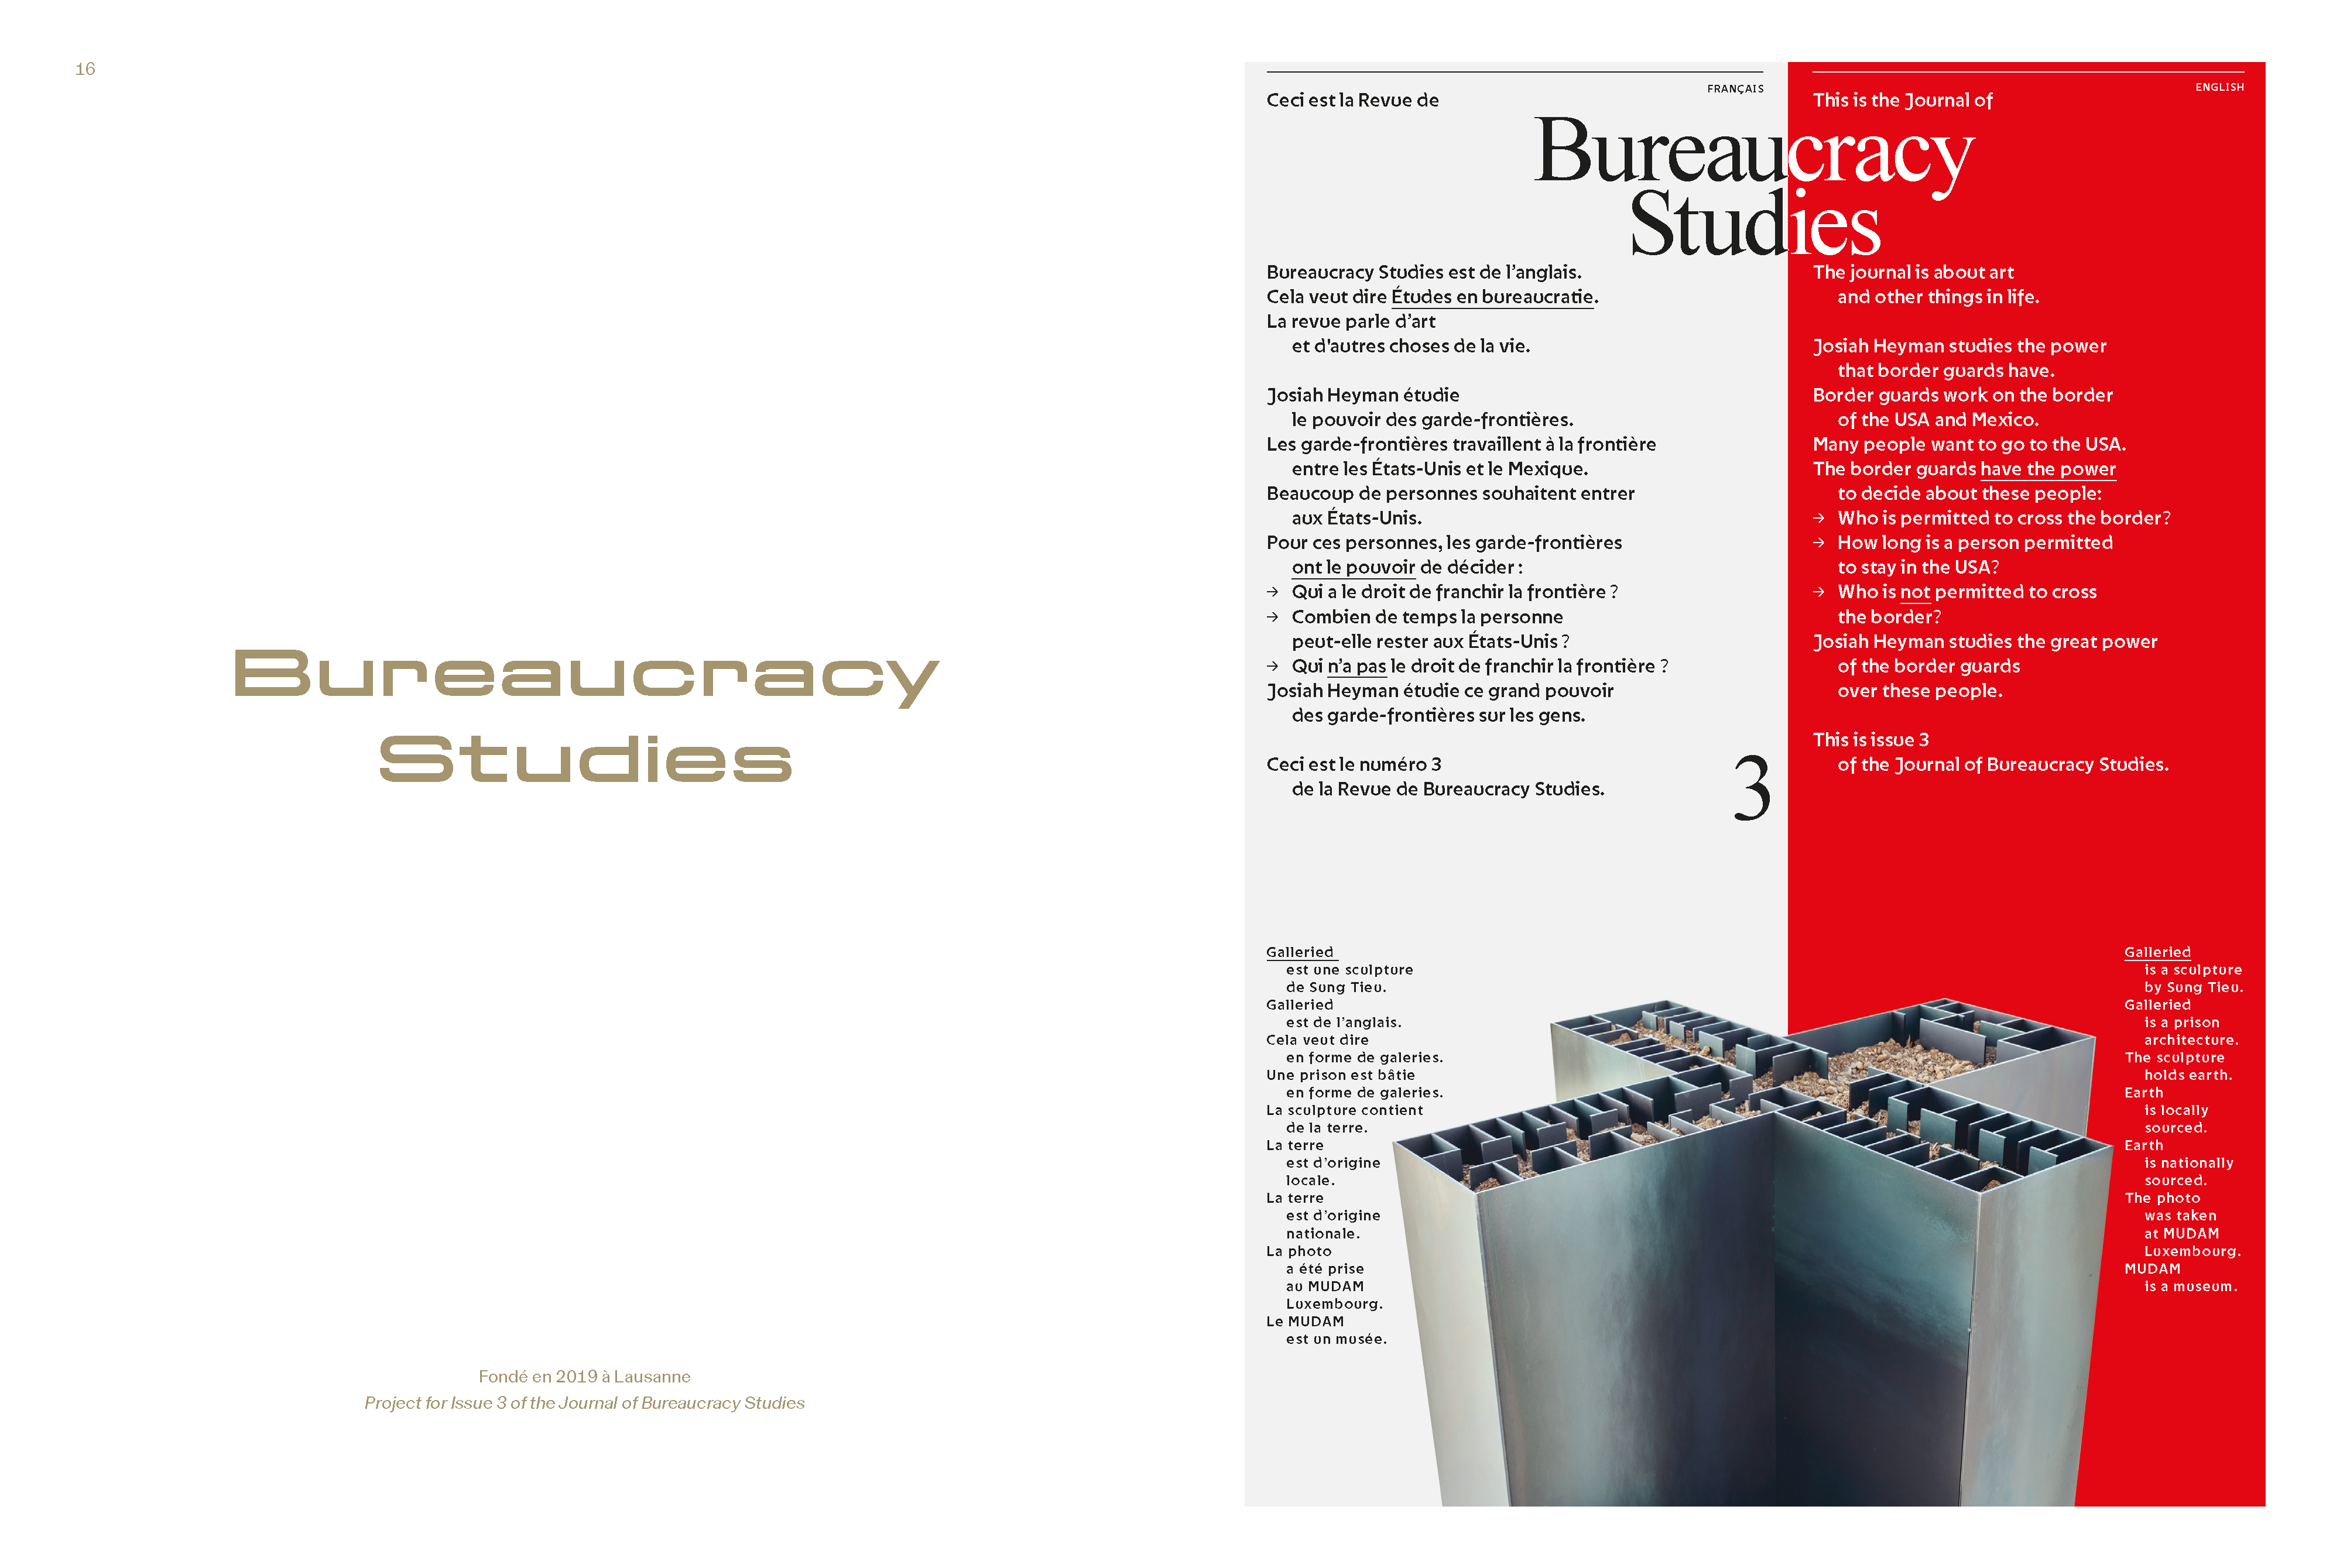 The text on the cover of issue 3 of the Journal of Bureaucracy Studies reads as follows: Josiah Heyman studies the power that border guards have. Border guards work on the border of the USA and Mexico. Many people want to go to the USA. The border guards have the power to decide about these people: Who is permitted to cross the border? How long is a person permitted to stay in the USA? Who is not permitted to cross the border? Josiah Heyman studies the great power of the border guards over these people.